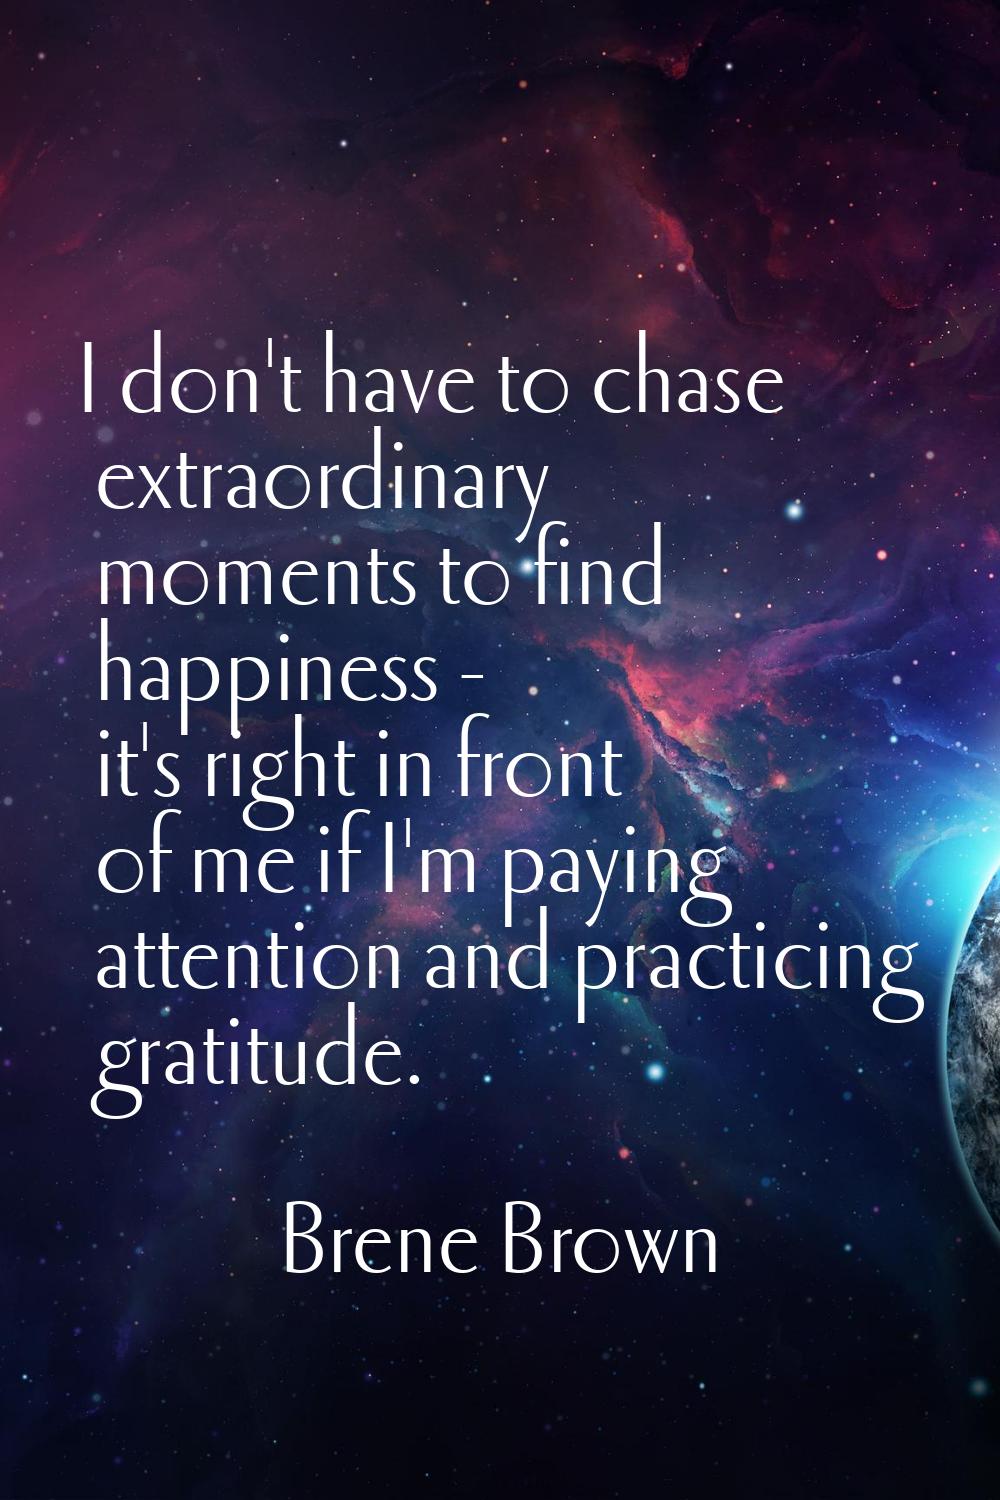 I don't have to chase extraordinary moments to find happiness - it's right in front of me if I'm pa